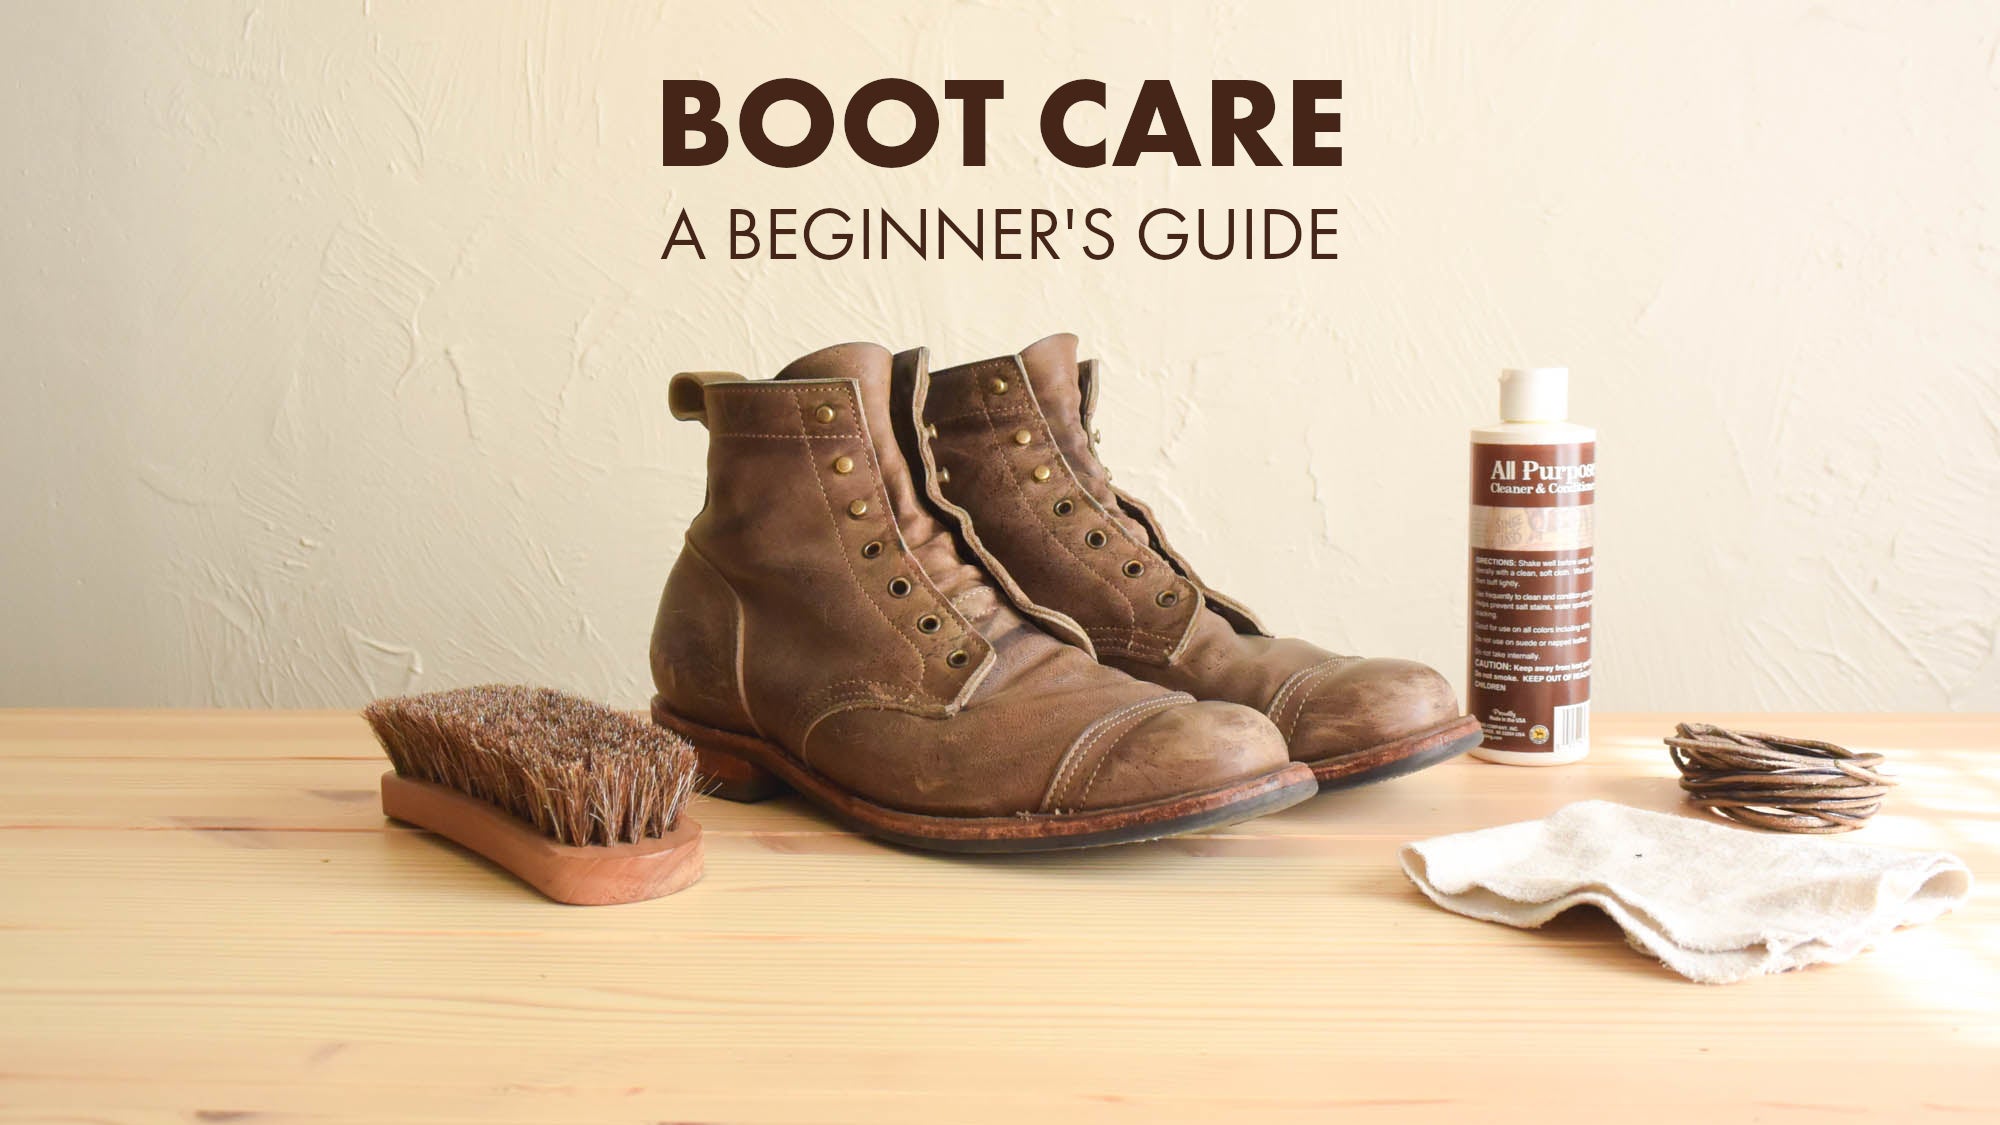 How To Wash Work Boots? Don'tHere's How You Clean Them